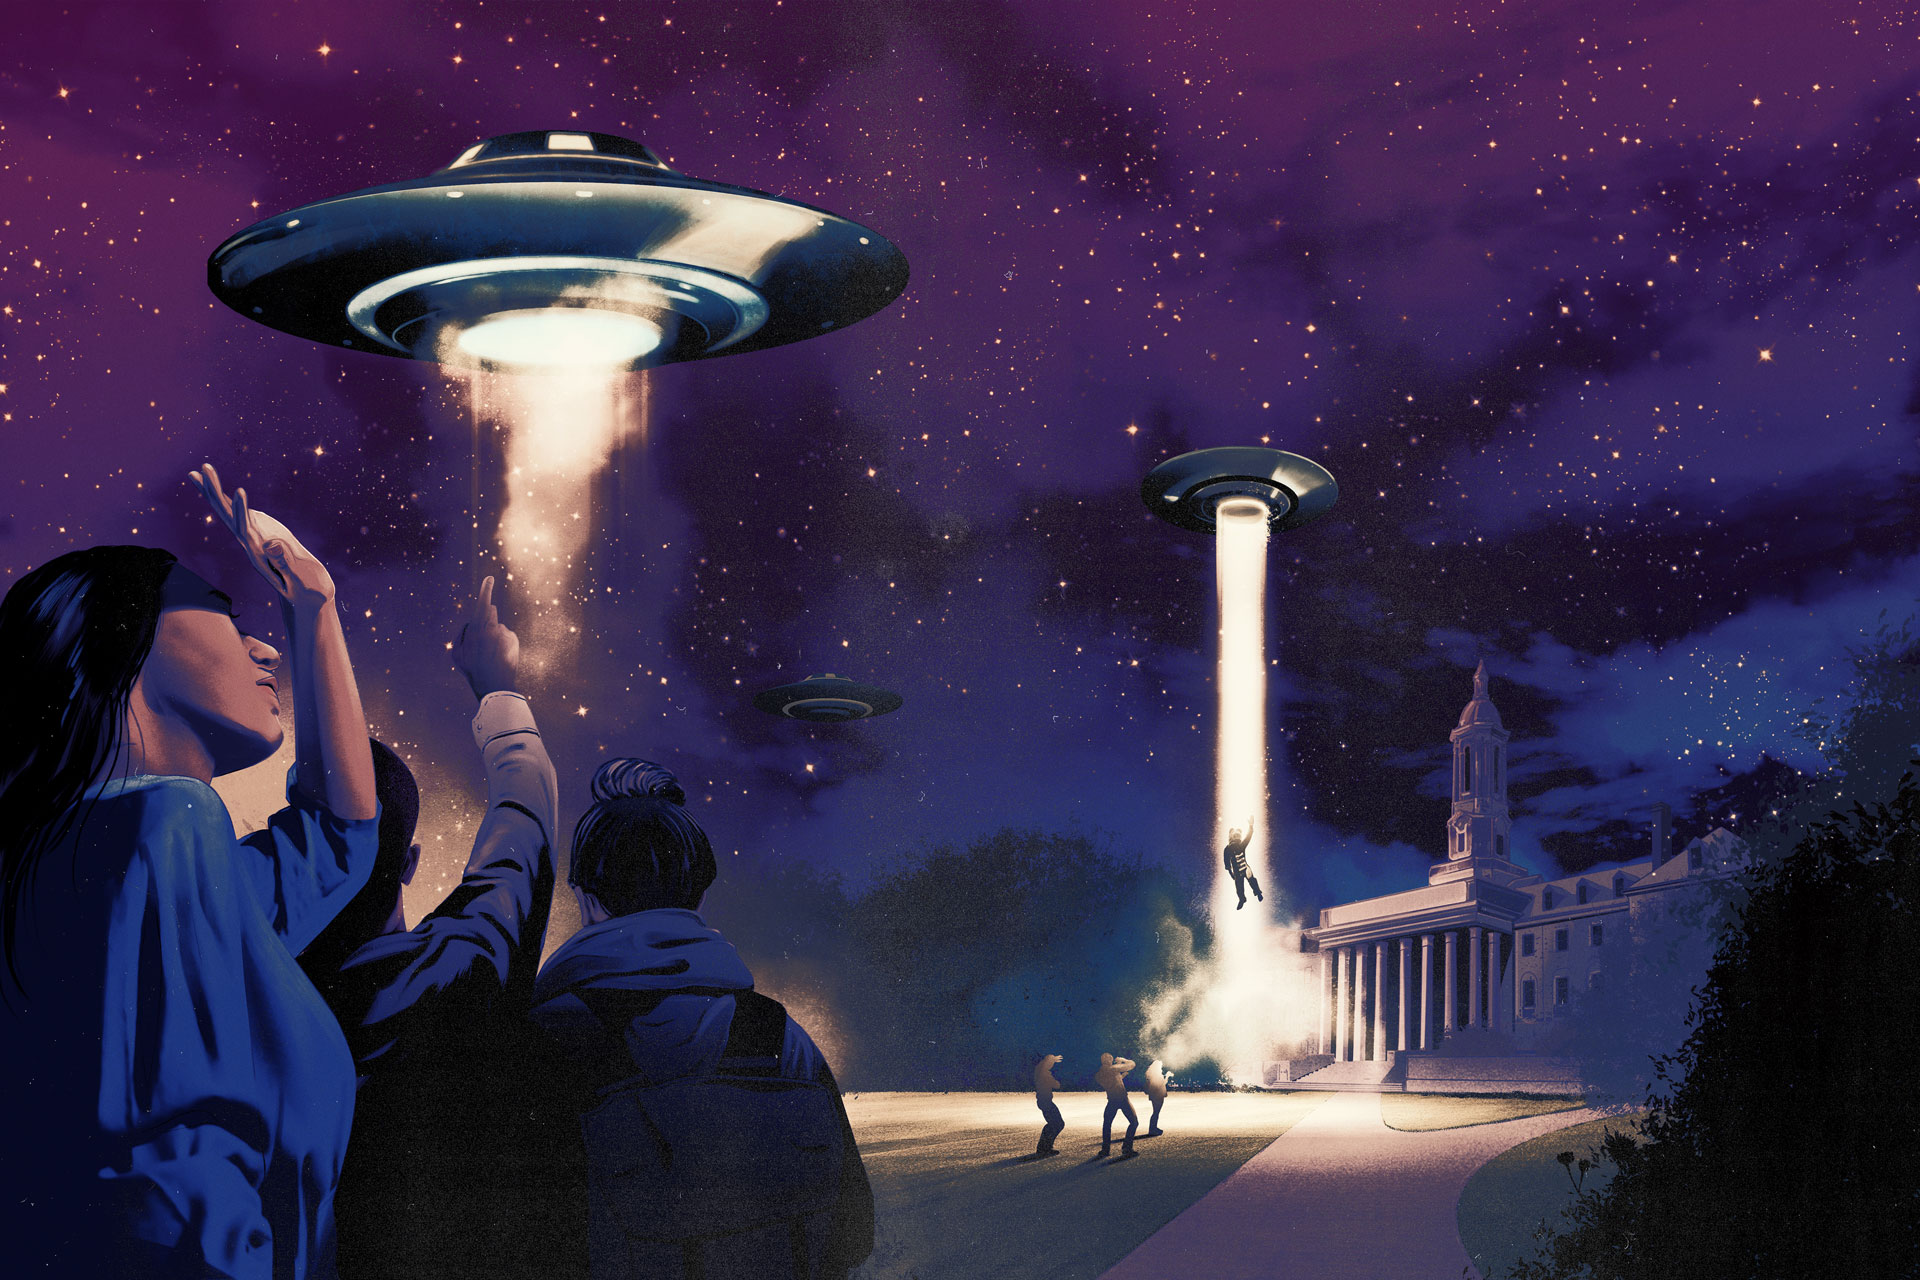 illustration of people shielding their eyes against the light from a UFO overhead with Old Main in the background as the Nittany Lion is beamed up, by Jonathan Bartlett